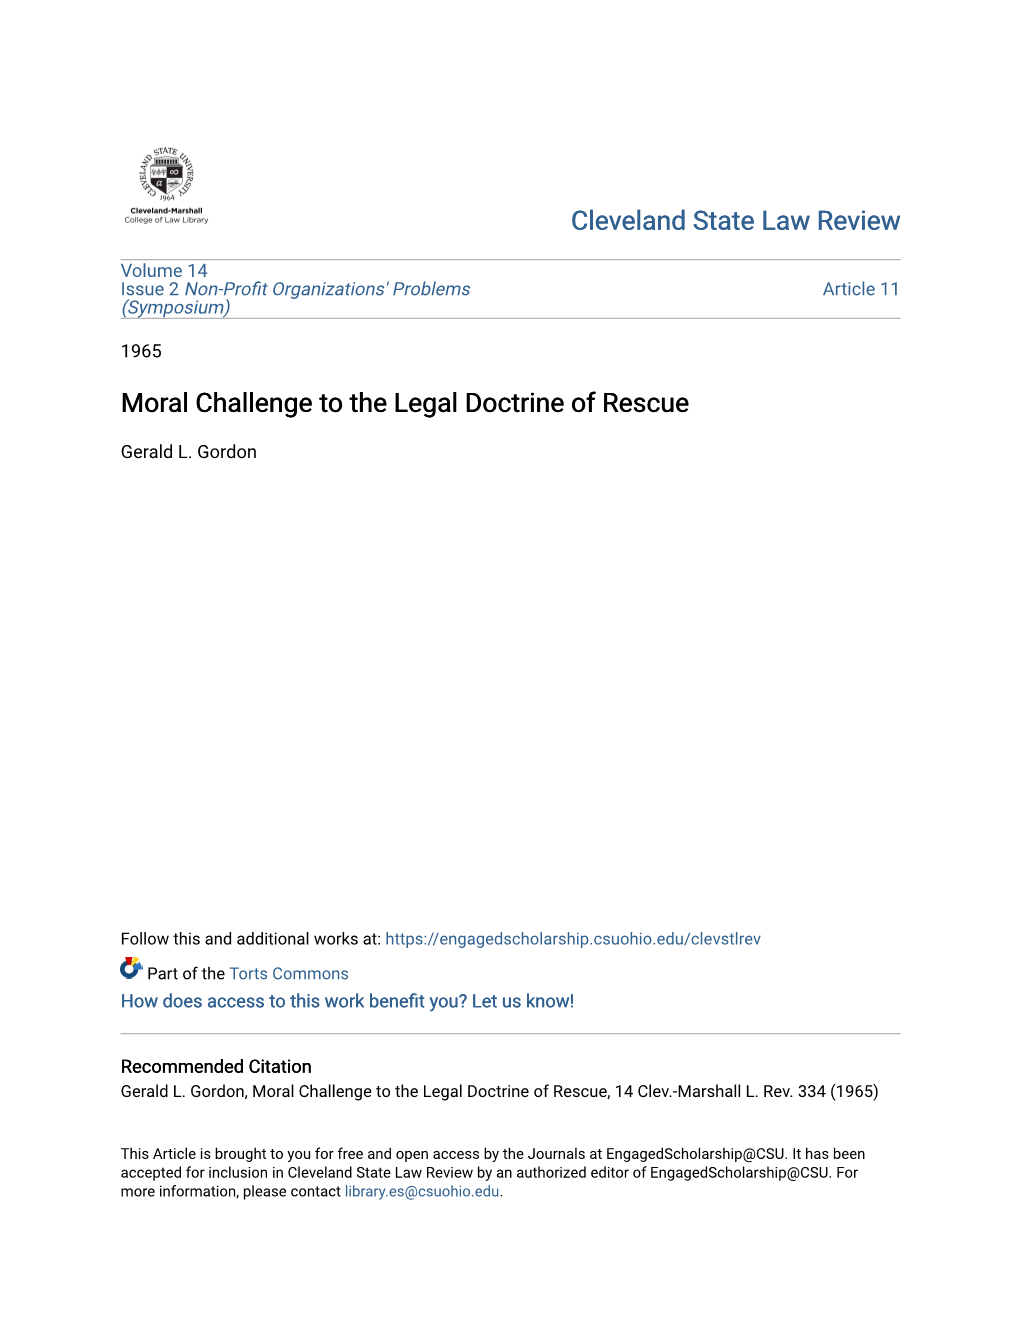 Moral Challenge to the Legal Doctrine of Rescue